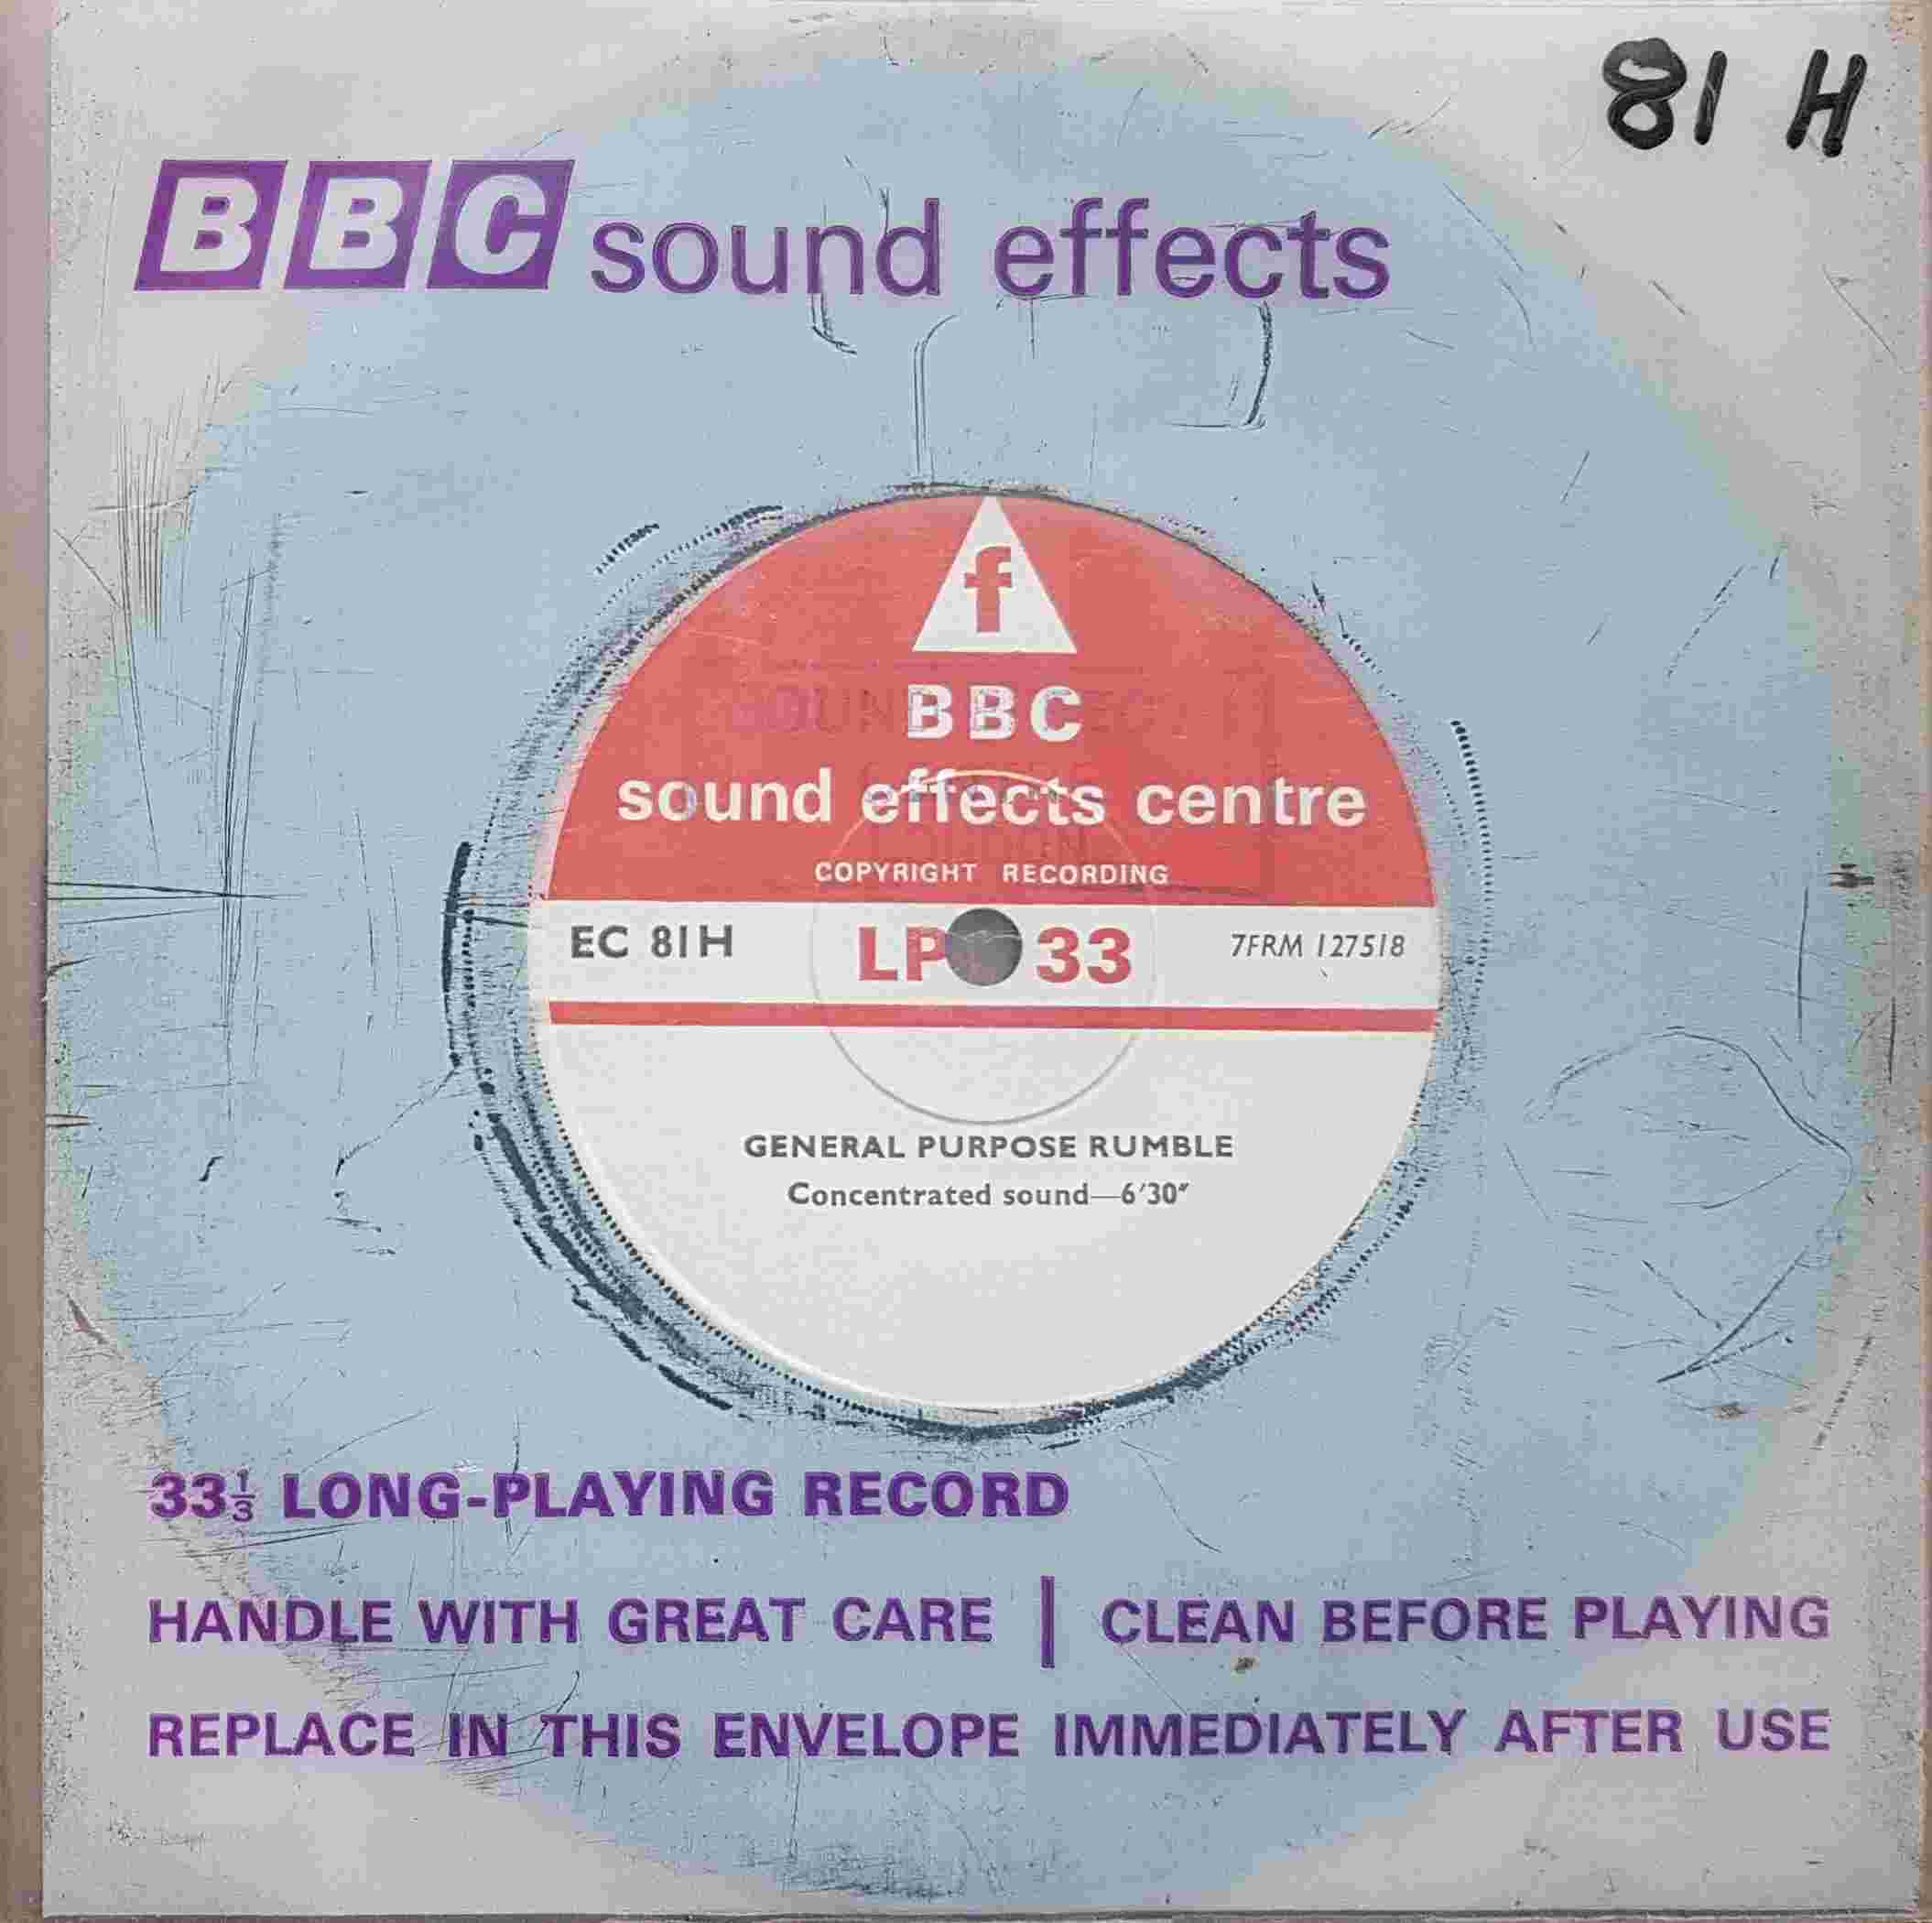 Picture of EC 81H General purpose rumble by artist Not registered from the BBC singles - Records and Tapes library